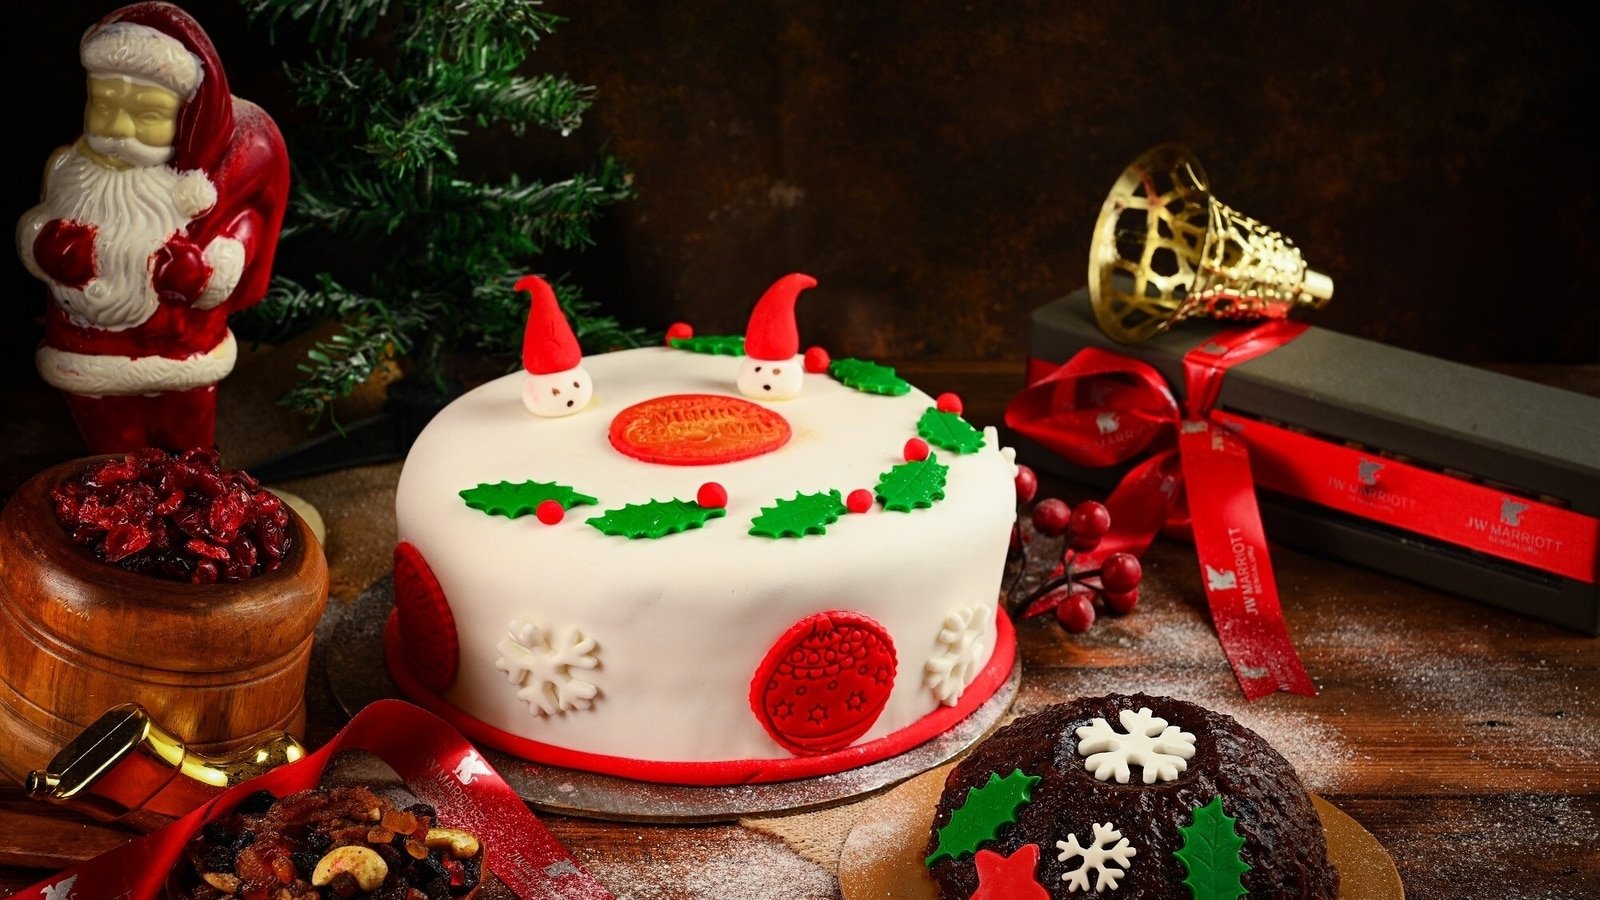 Best Christmas cakes recipes that you can whip up at home in a jiffy